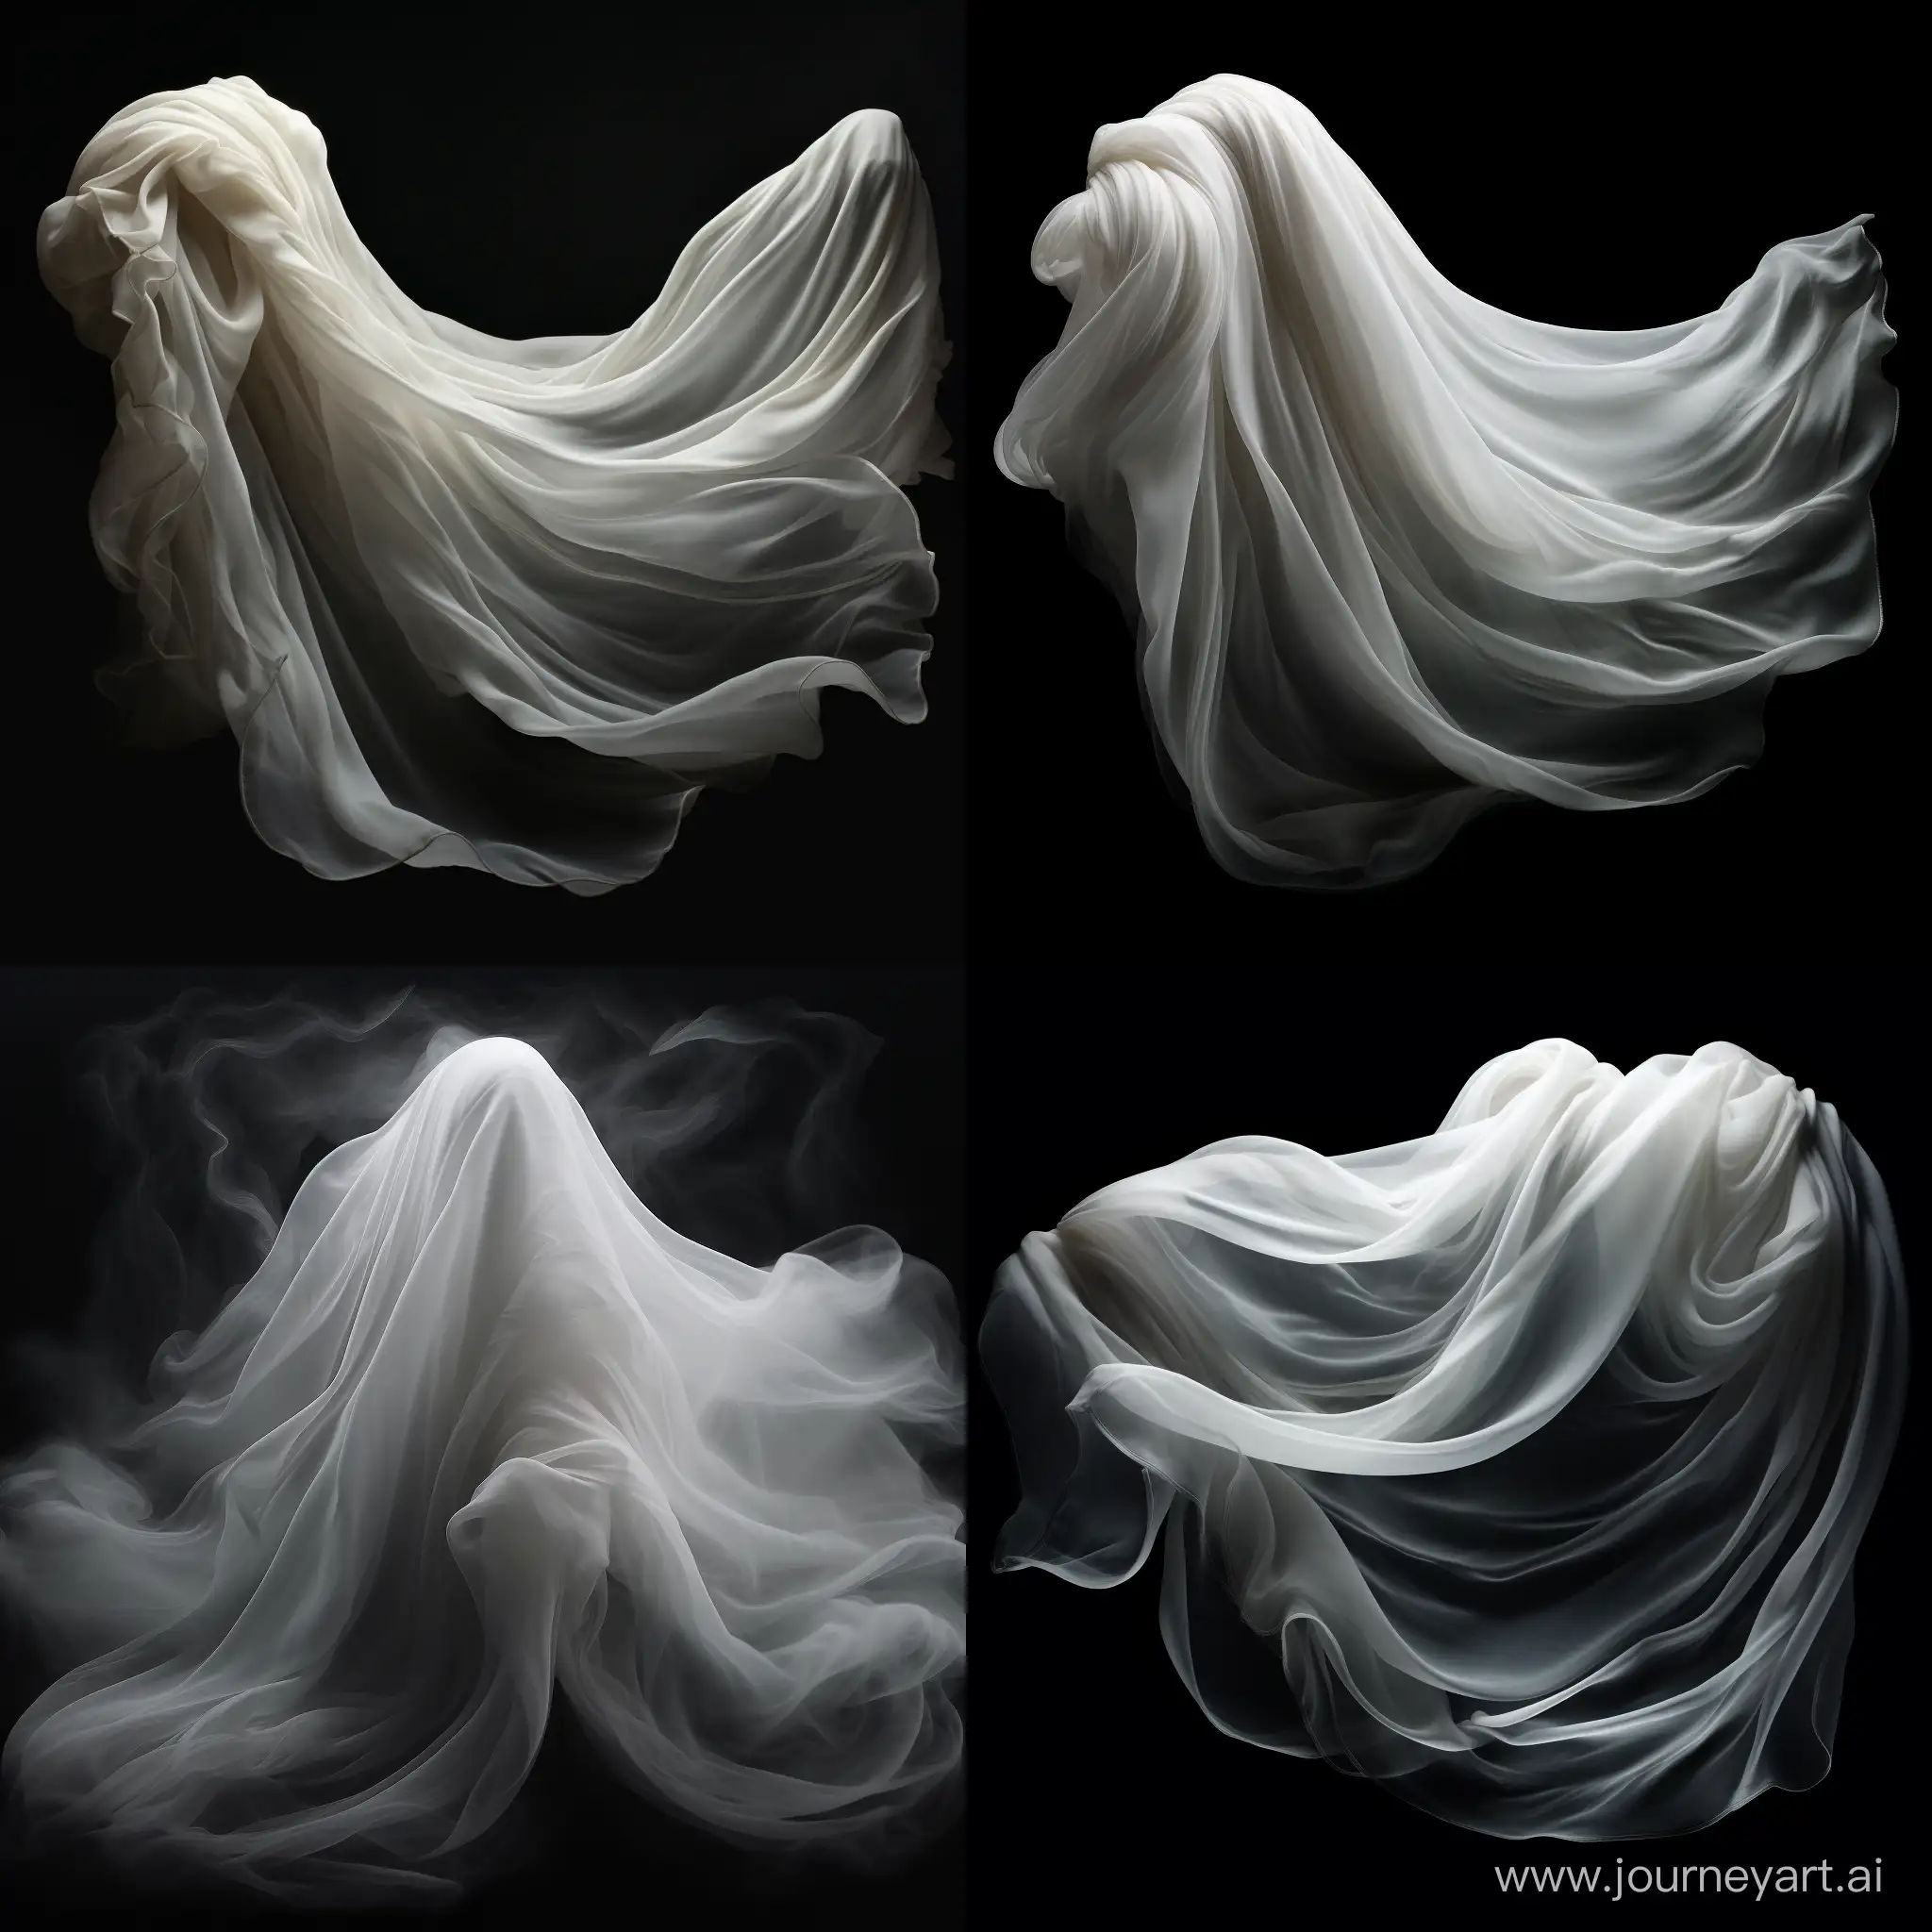 Mysterious white Veil or white flowing fabrics, made like an epic fantasy on black background